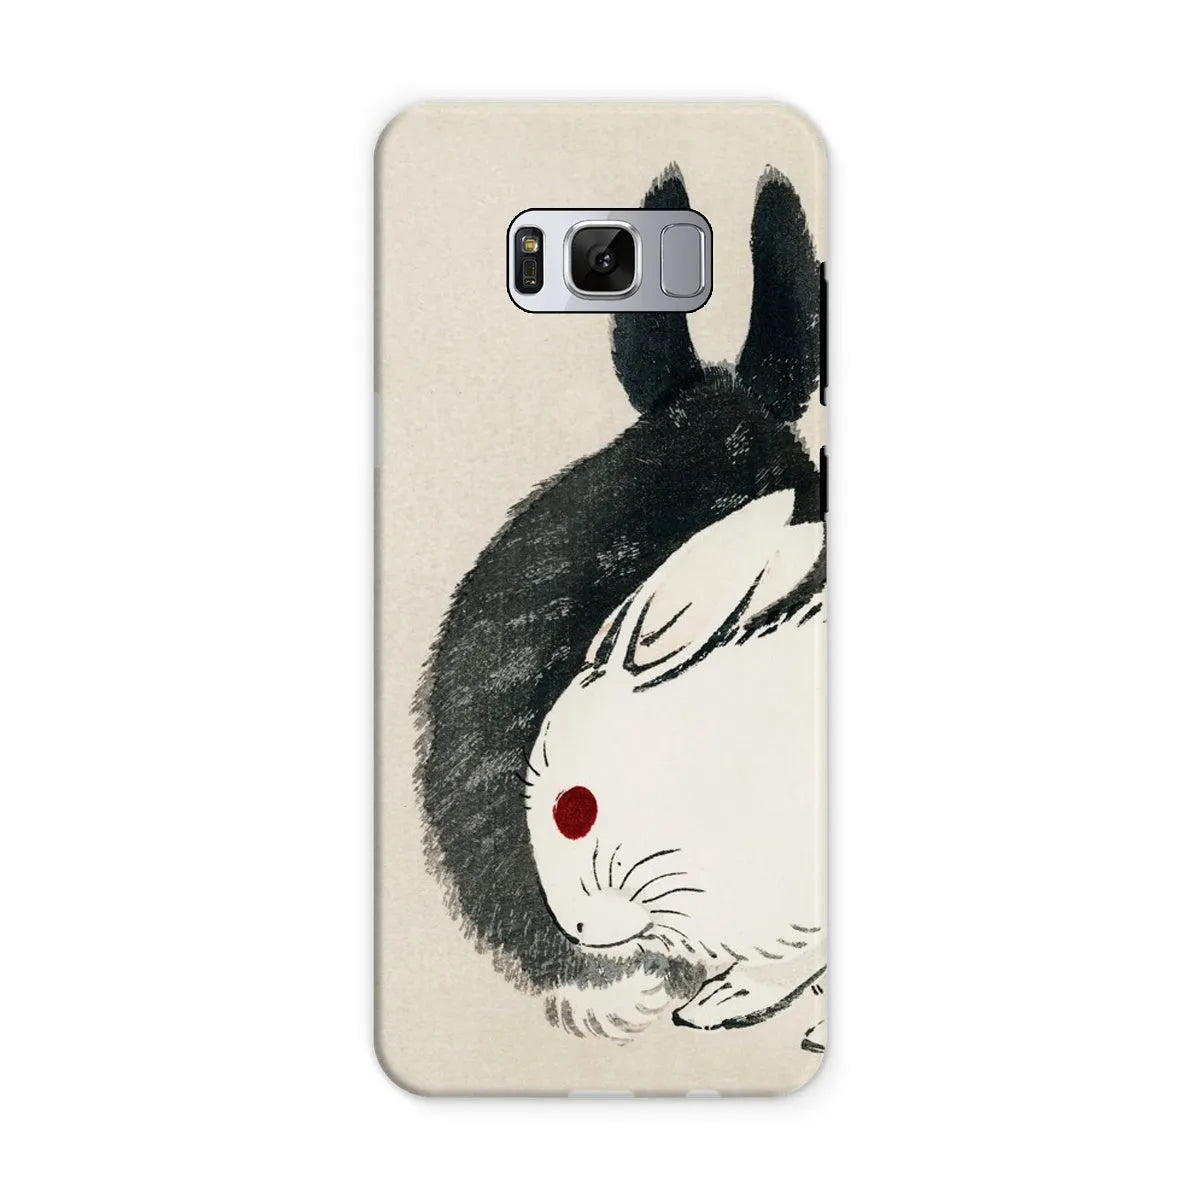 Rabbits - Black And White Meiji Art Phone Case - Kōno Bairei - Samsung Galaxy S8 / Matte - Mobile Phone Cases